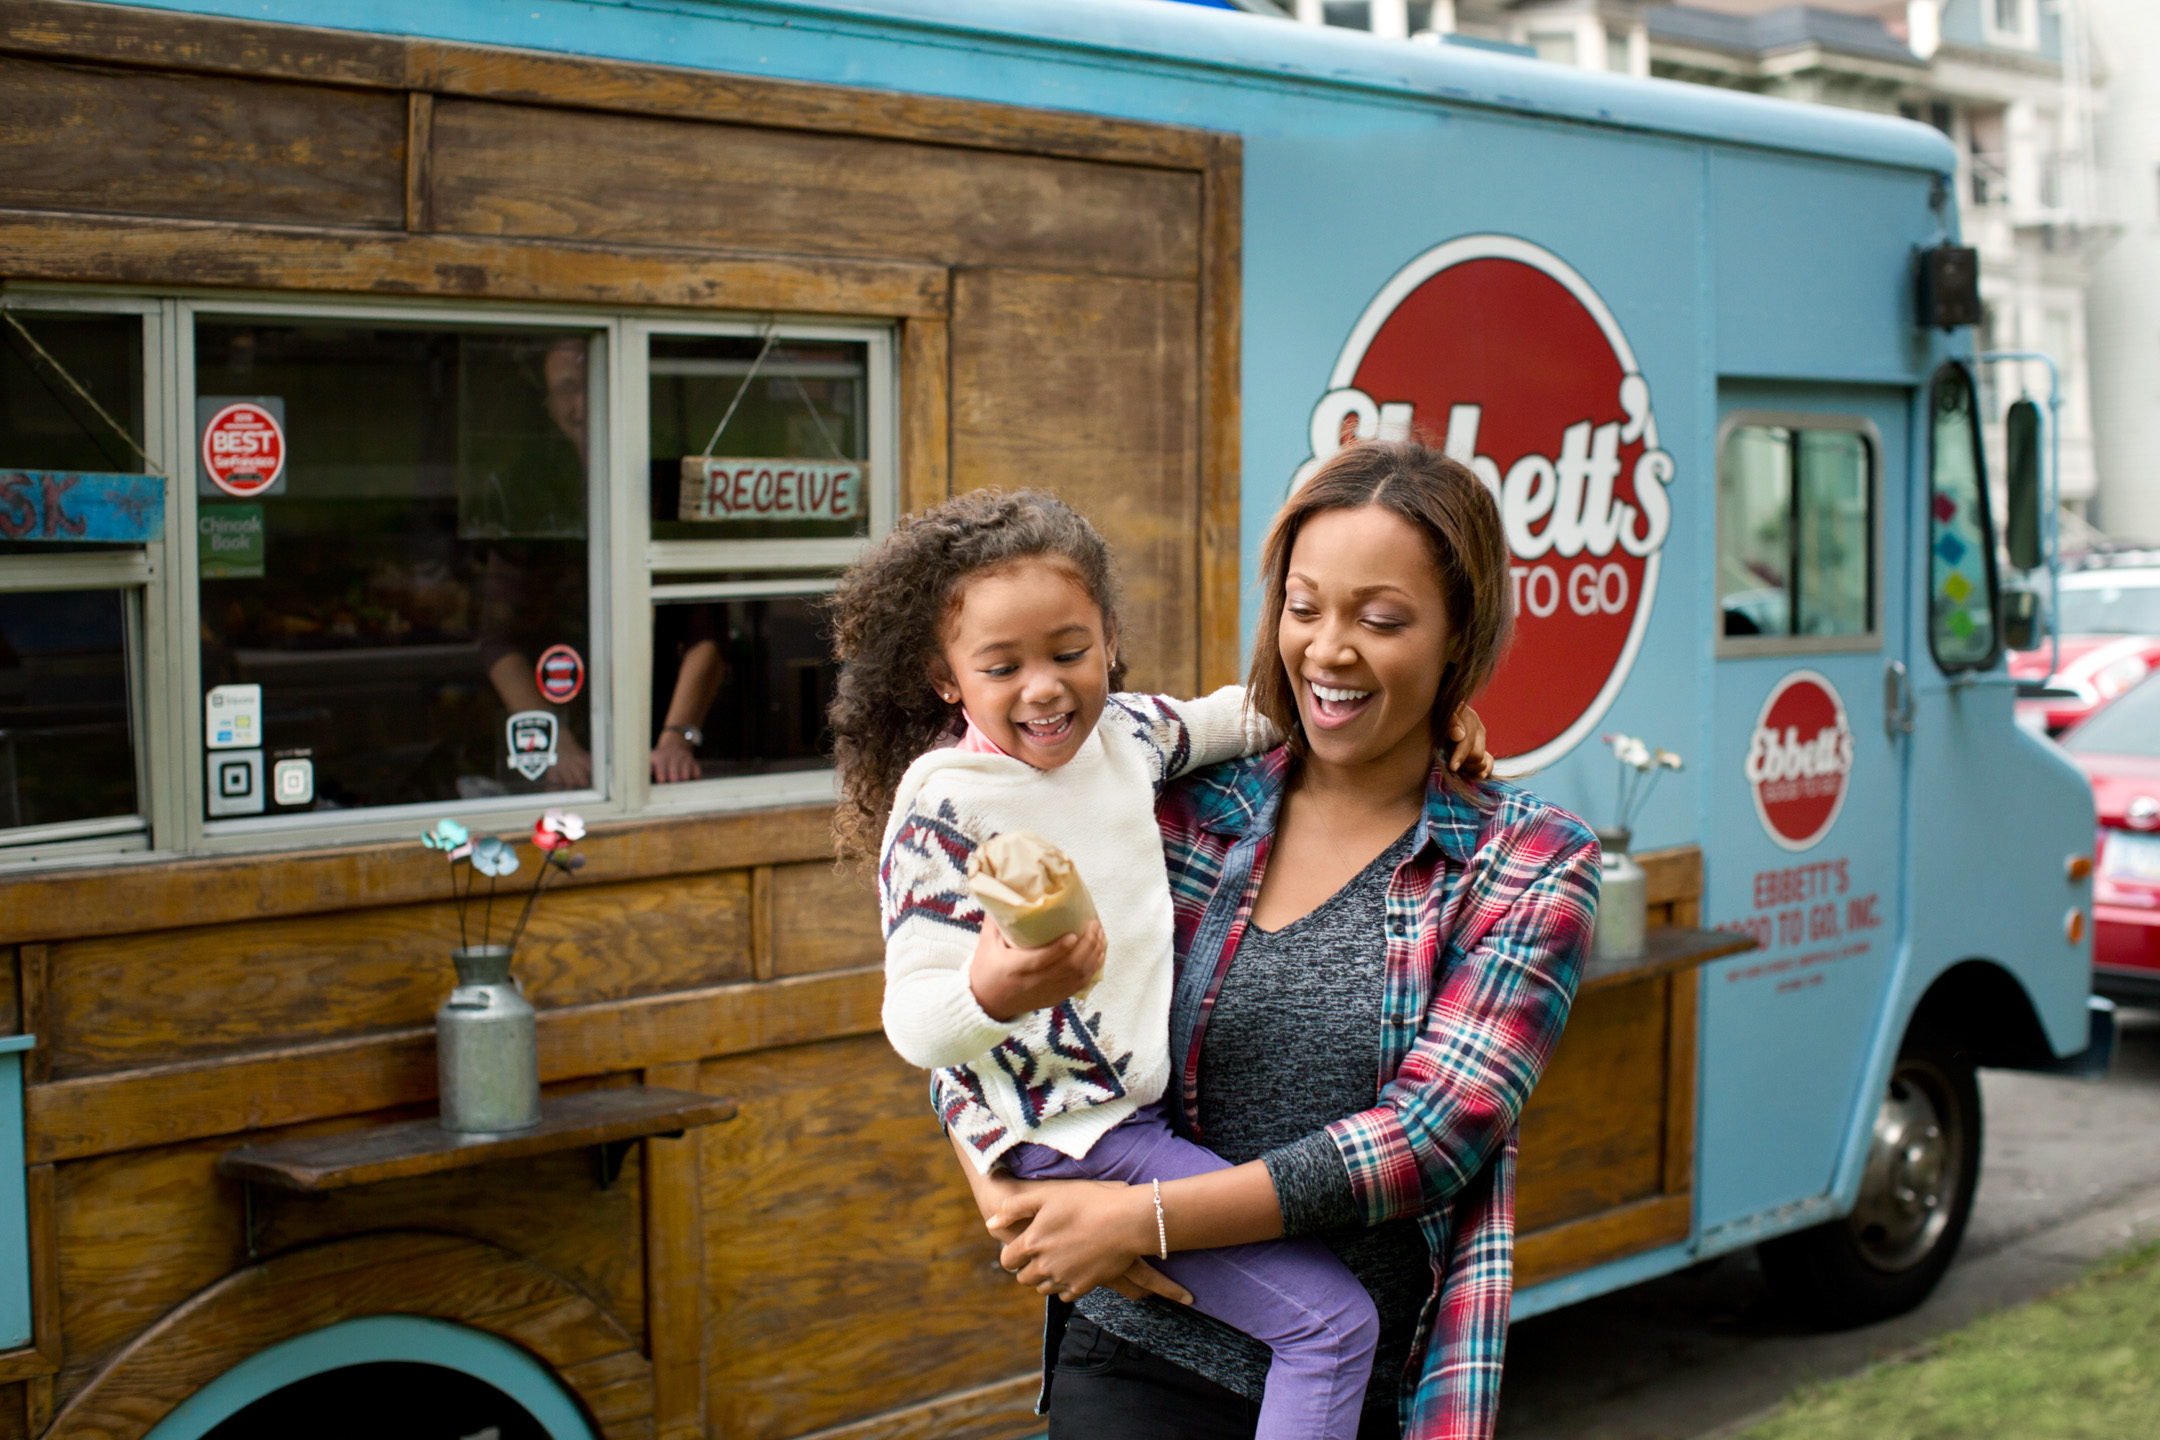 A woman and her daughter share burrito from a food truck.